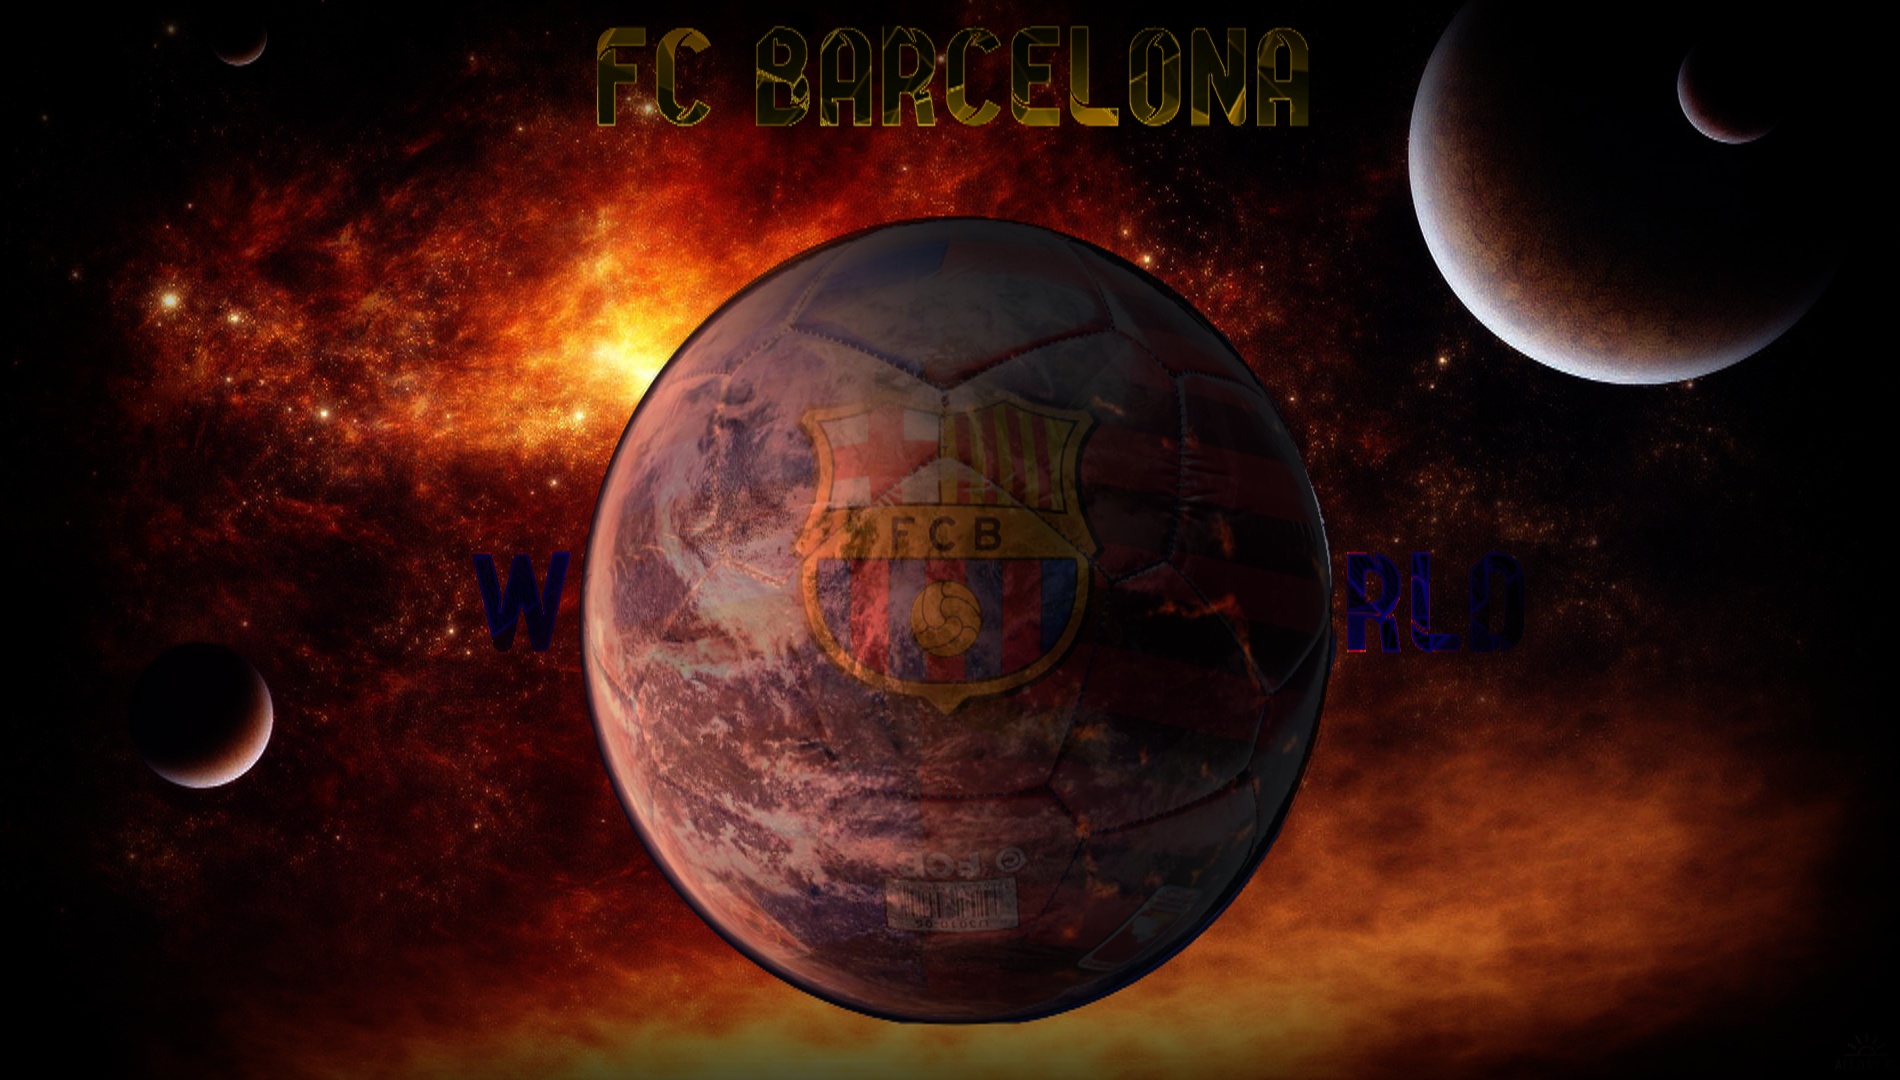 110+ FC Barcelona HD Wallpapers and Backgrounds